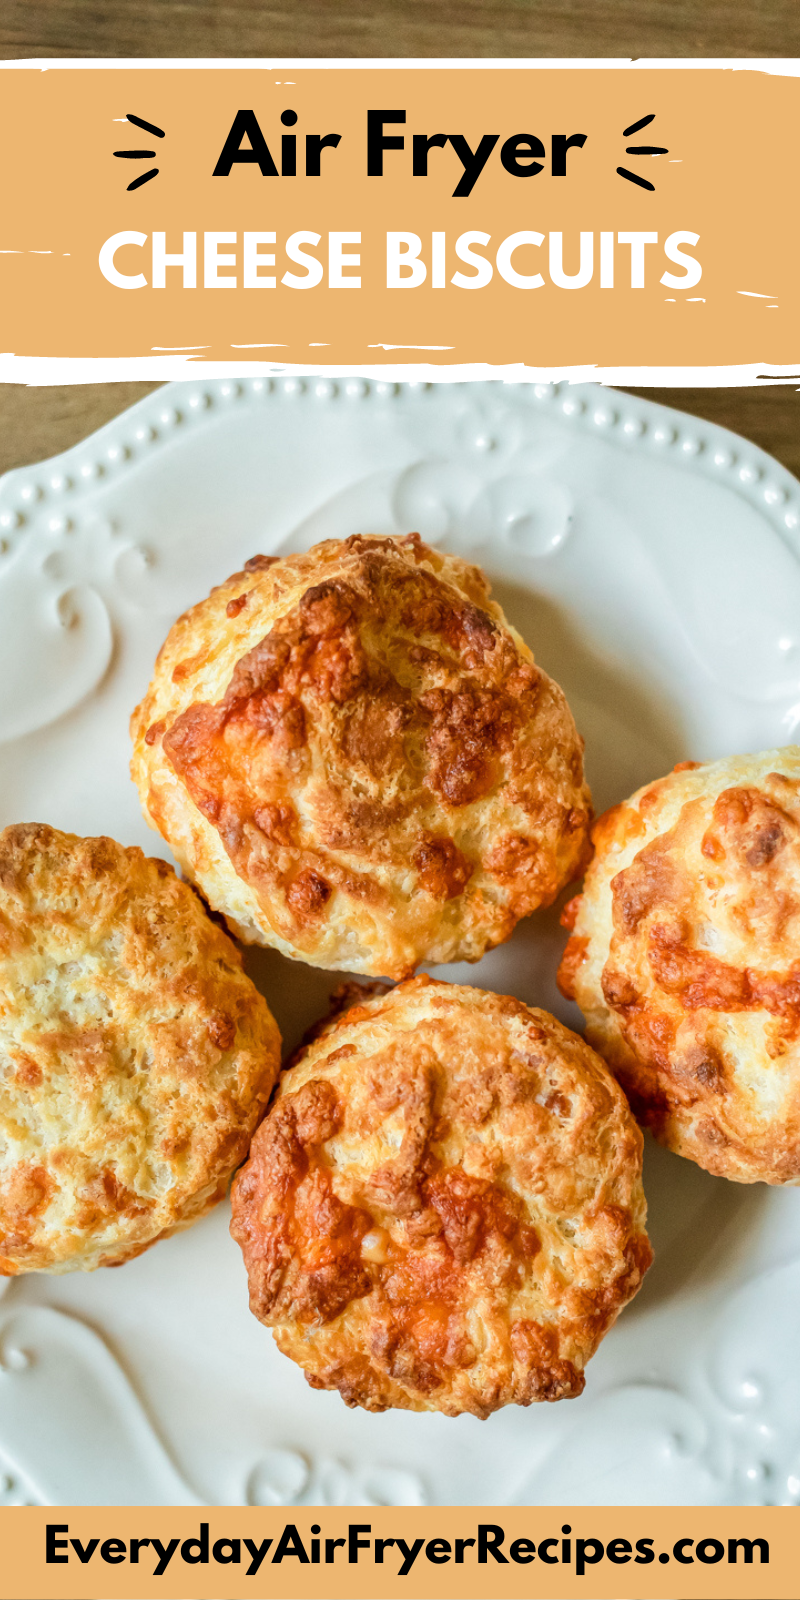 Love biscuits? Then you will want to try these flakey homemade cheese biscuits in the air fryer. #airfryer #biscuits #cheesebiscuits